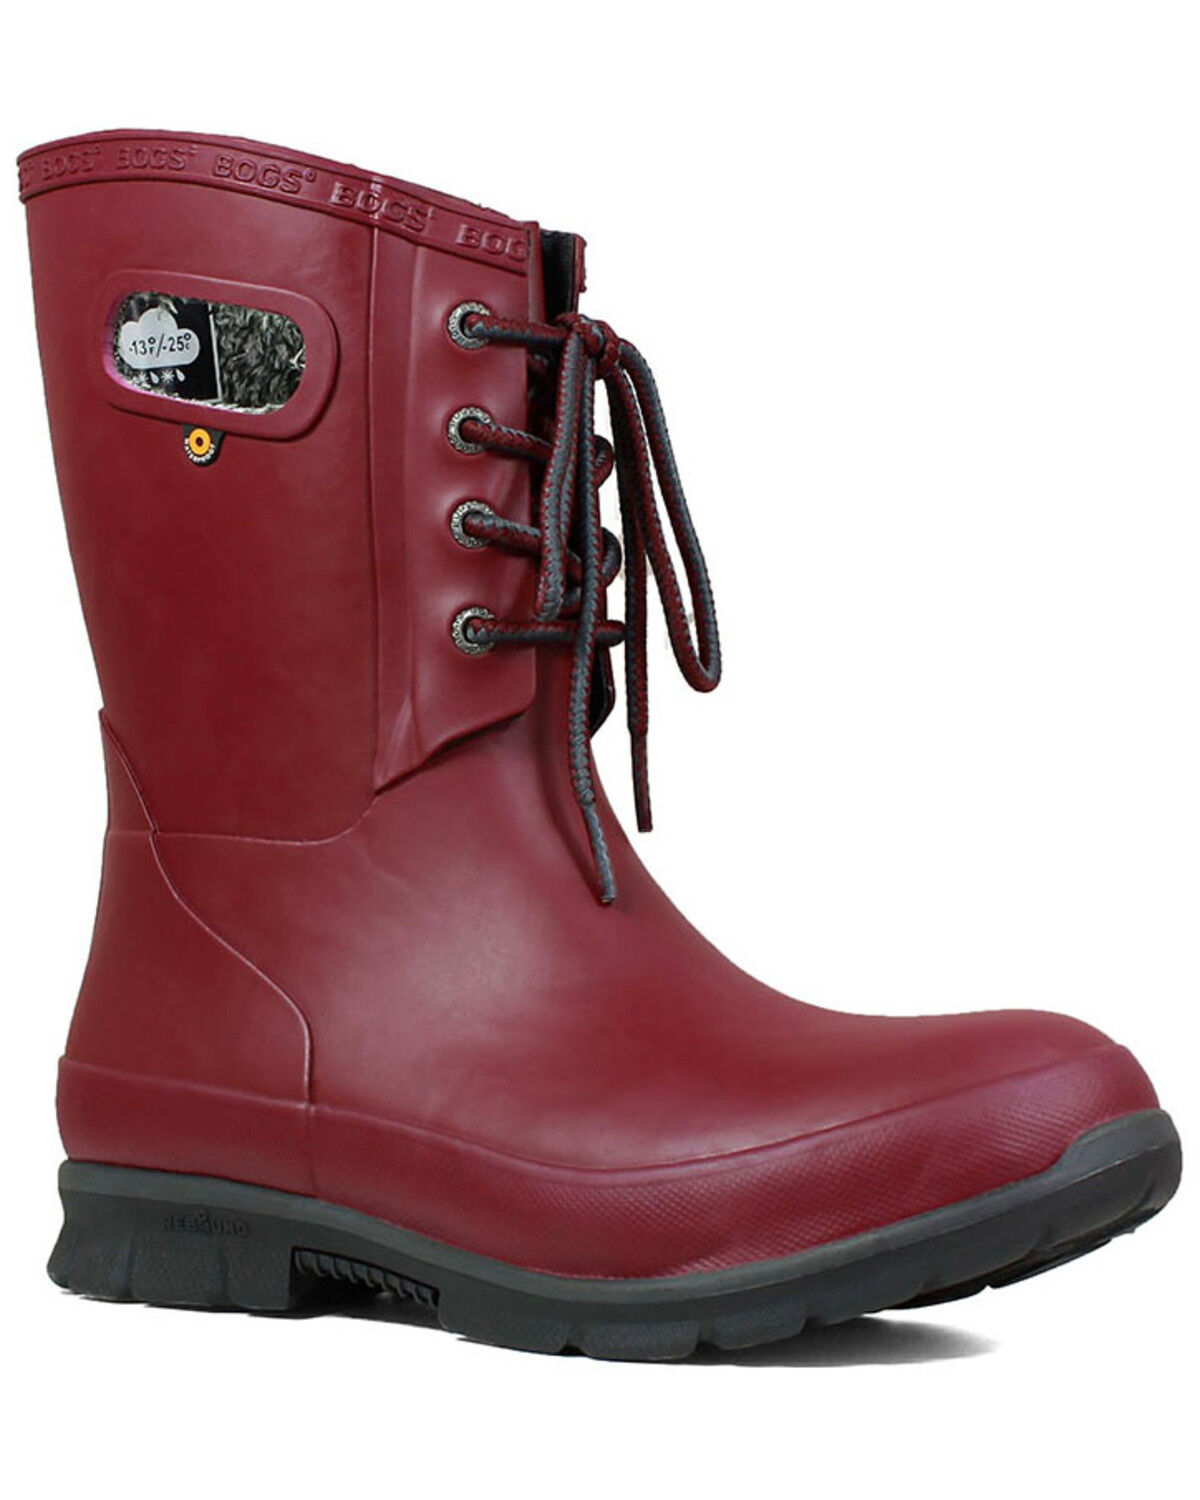 women's insulated cowboy boots